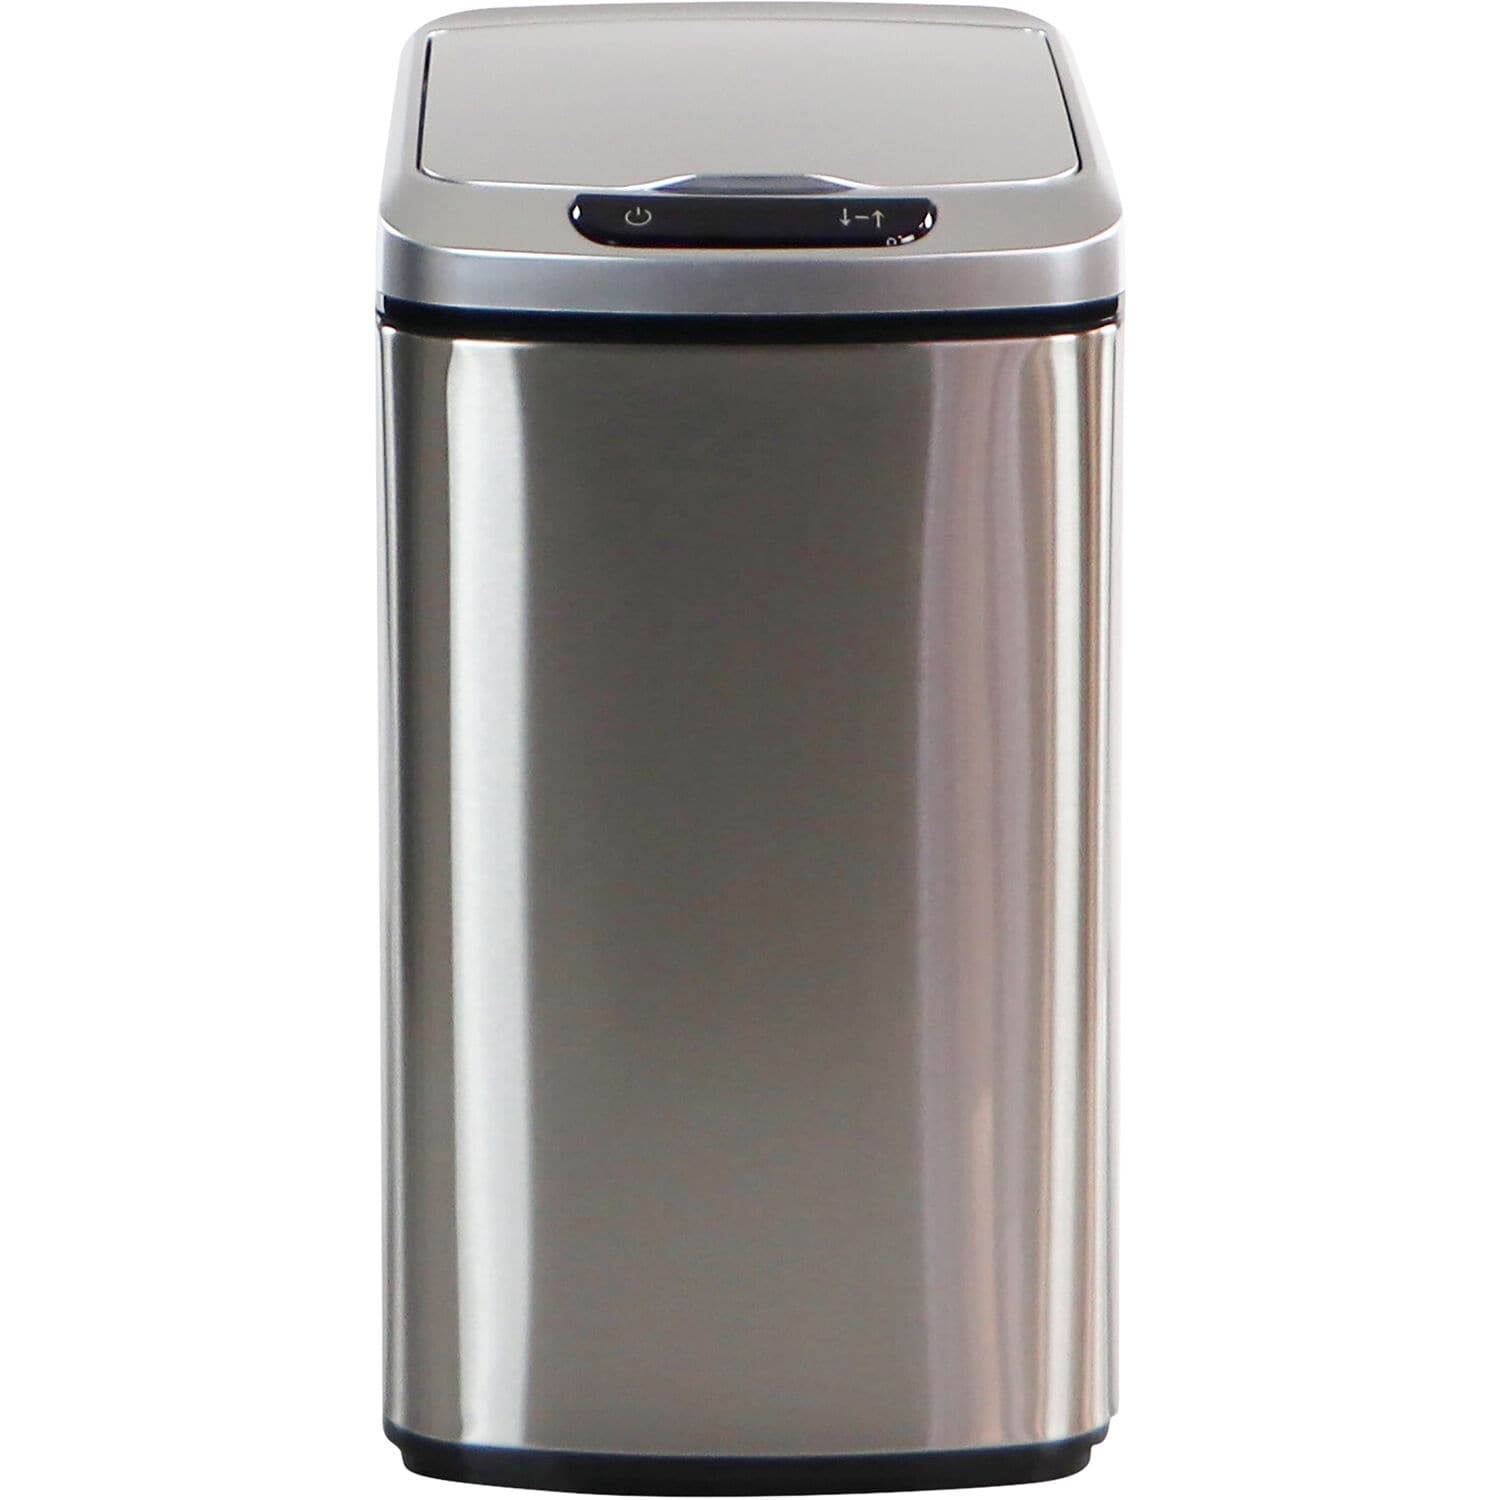 Hanover 12 l/3.2 gal. Trash Can with Sensor Lid, Stainless Steel